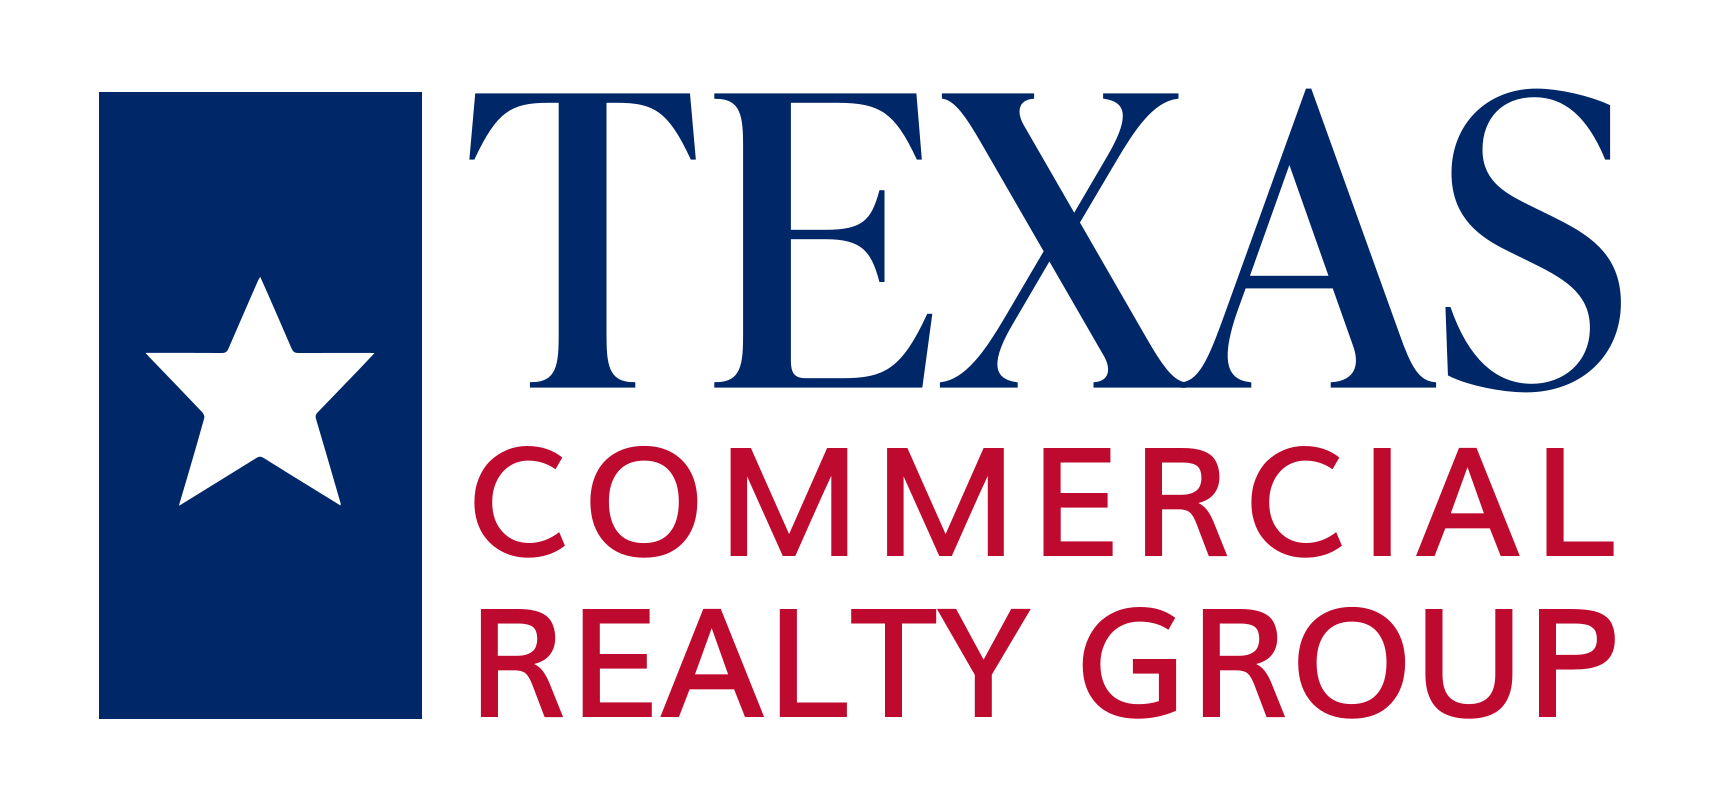 Texas Commercial Realty Group logo